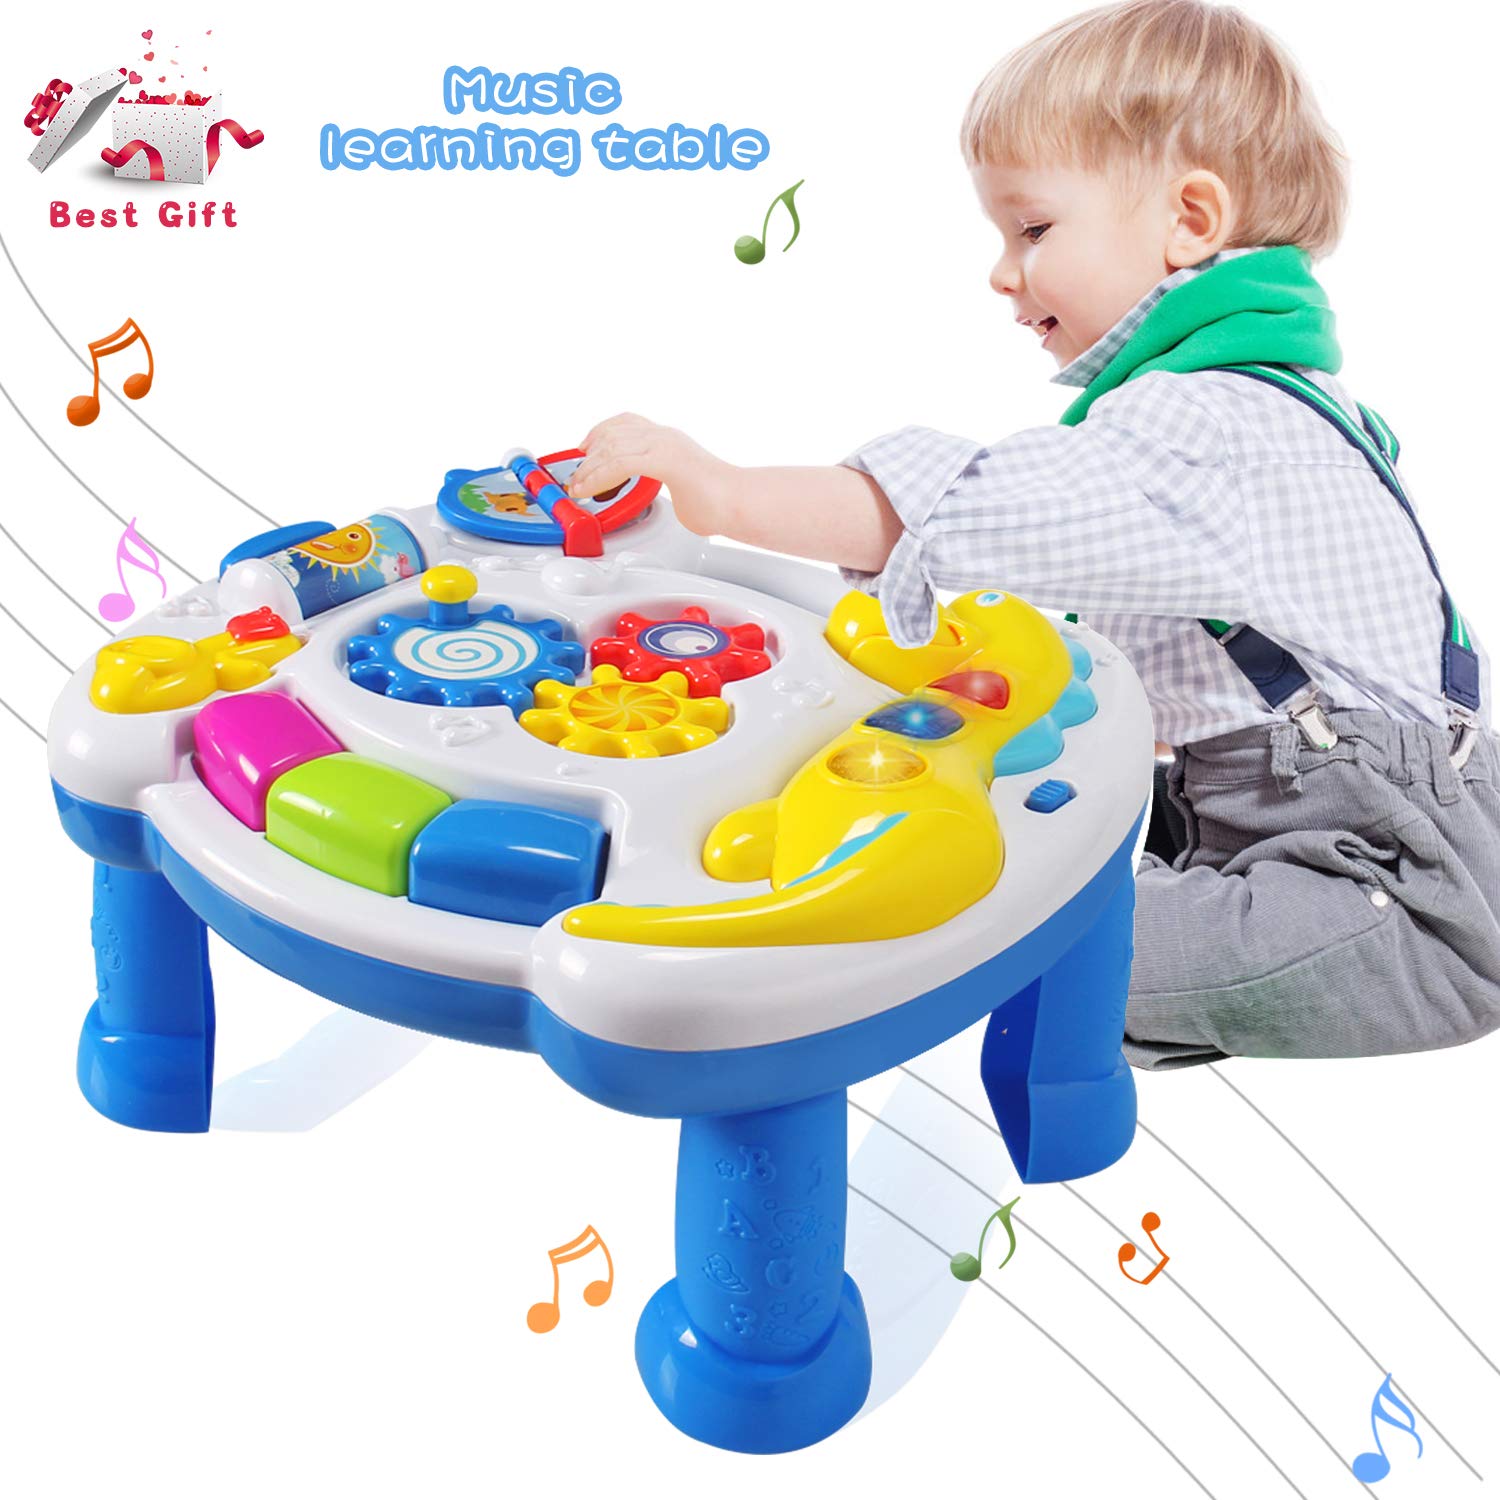 HOMOFY Homof Baby Toys Musical Learning Table 6 Months Up-Early Education Music Activity Center Game Table Toddlers, Infant, Kids Toys for 1 2 3 Years Old Boys & Girls- Lighting & Sound Gifts